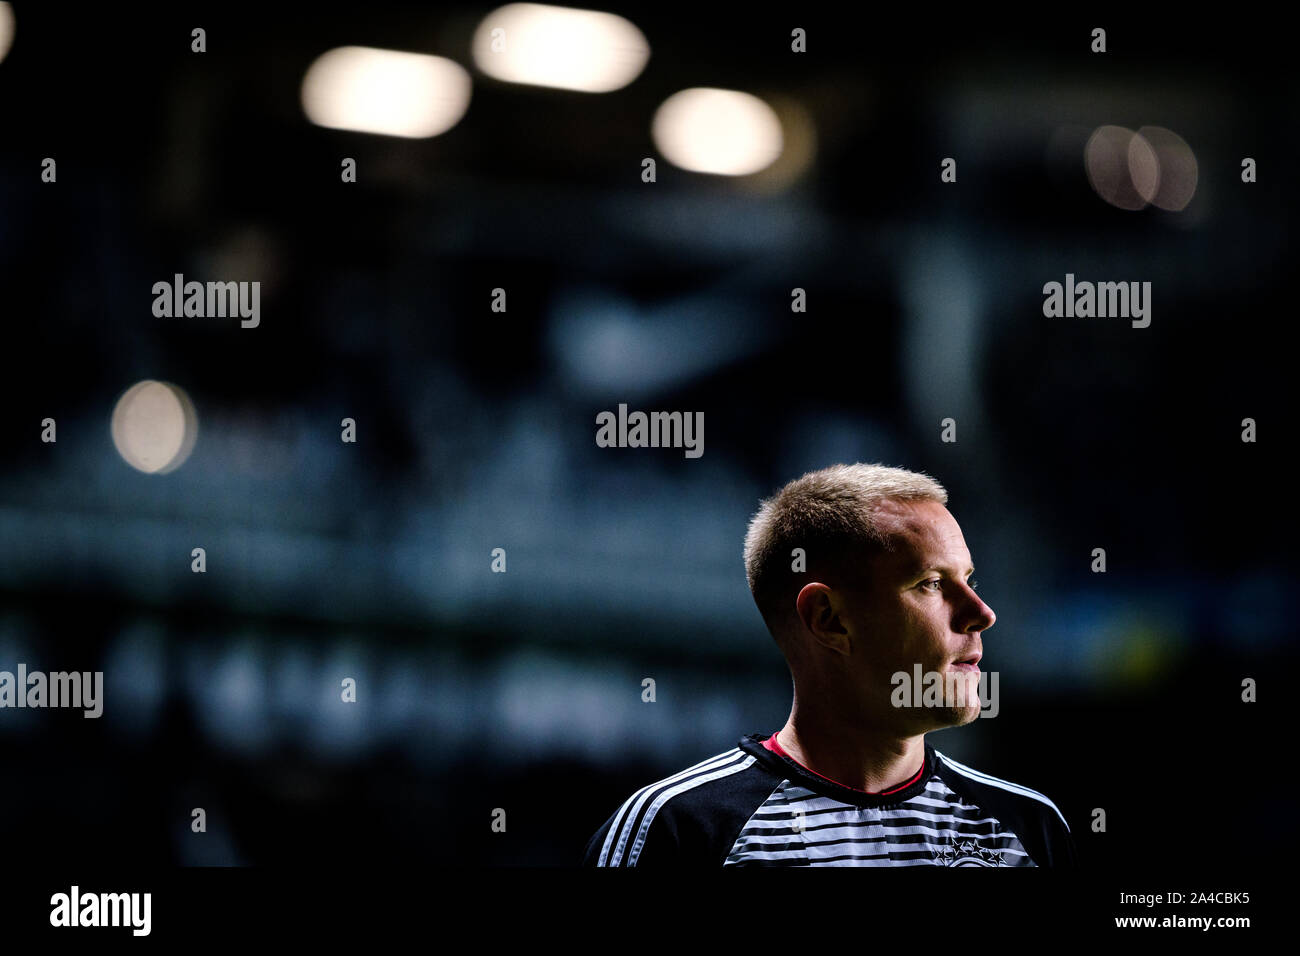 Tallinn, Estonia. 13th Oct, 2019. Mark- Andre Ter Stegen (22) of Germany on warm-up during the Euro 2020 qualifiers game between Estonia and Germany at A. le Coq Arena.(Final score: Estonia 0-3 Germany) Credit: SOPA Images Limited/Alamy Live News Stock Photo